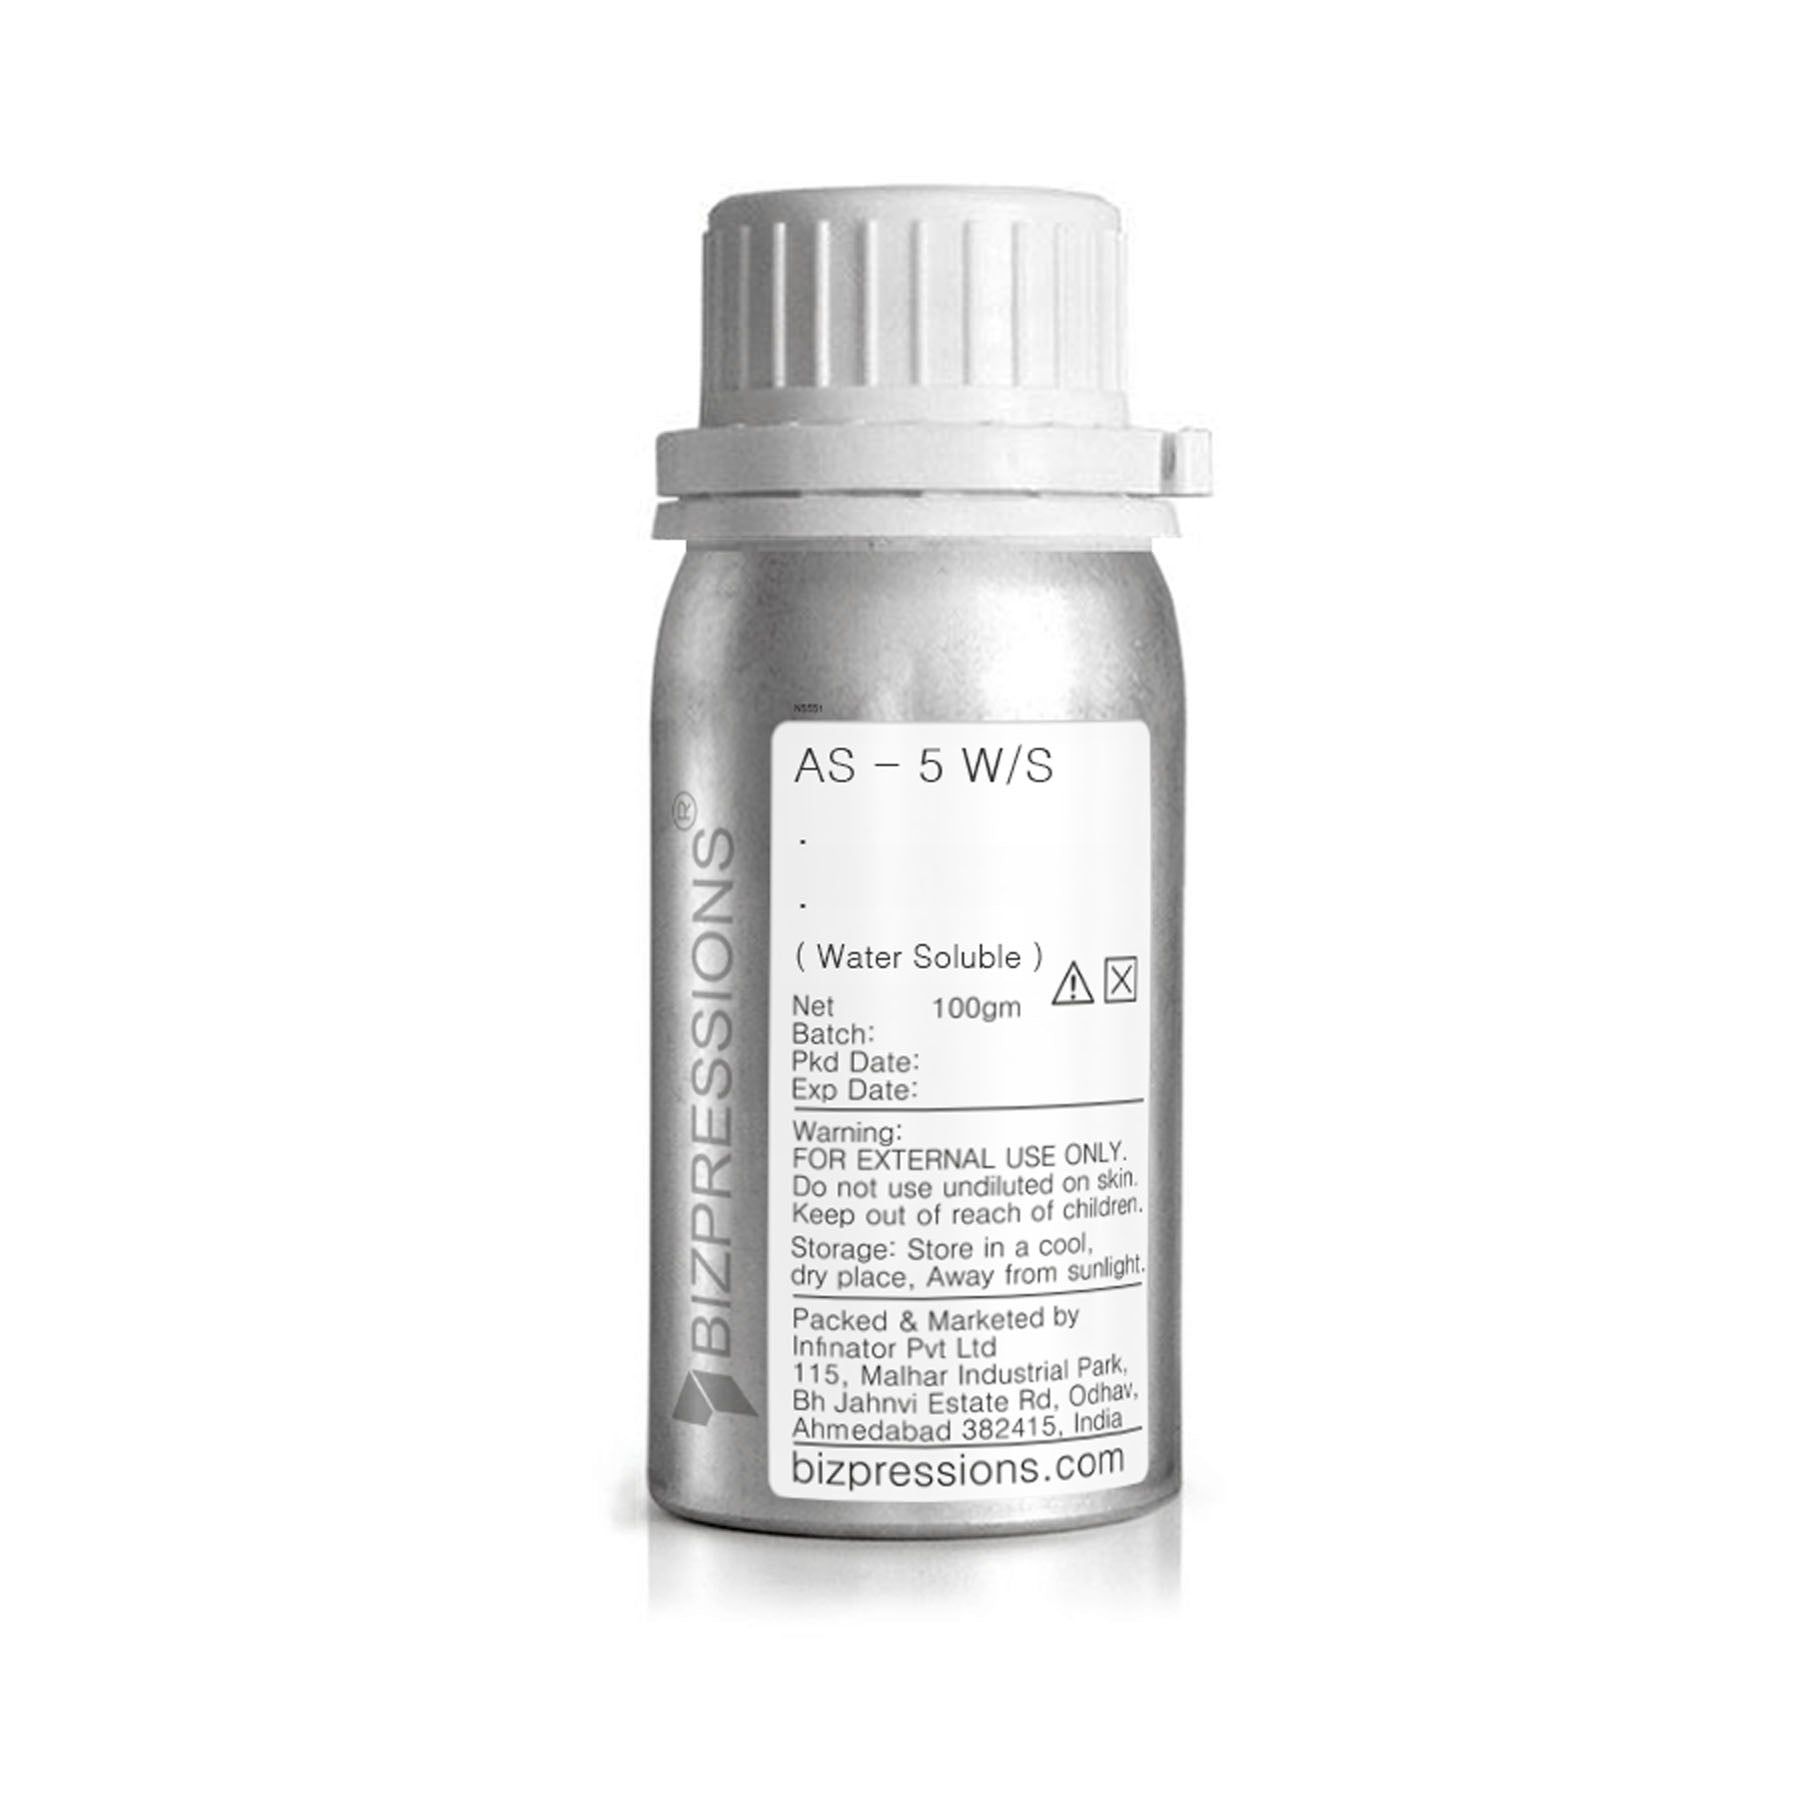 AS - 5 W/S - Fragrance ( Water Soluble ) - 100 gm